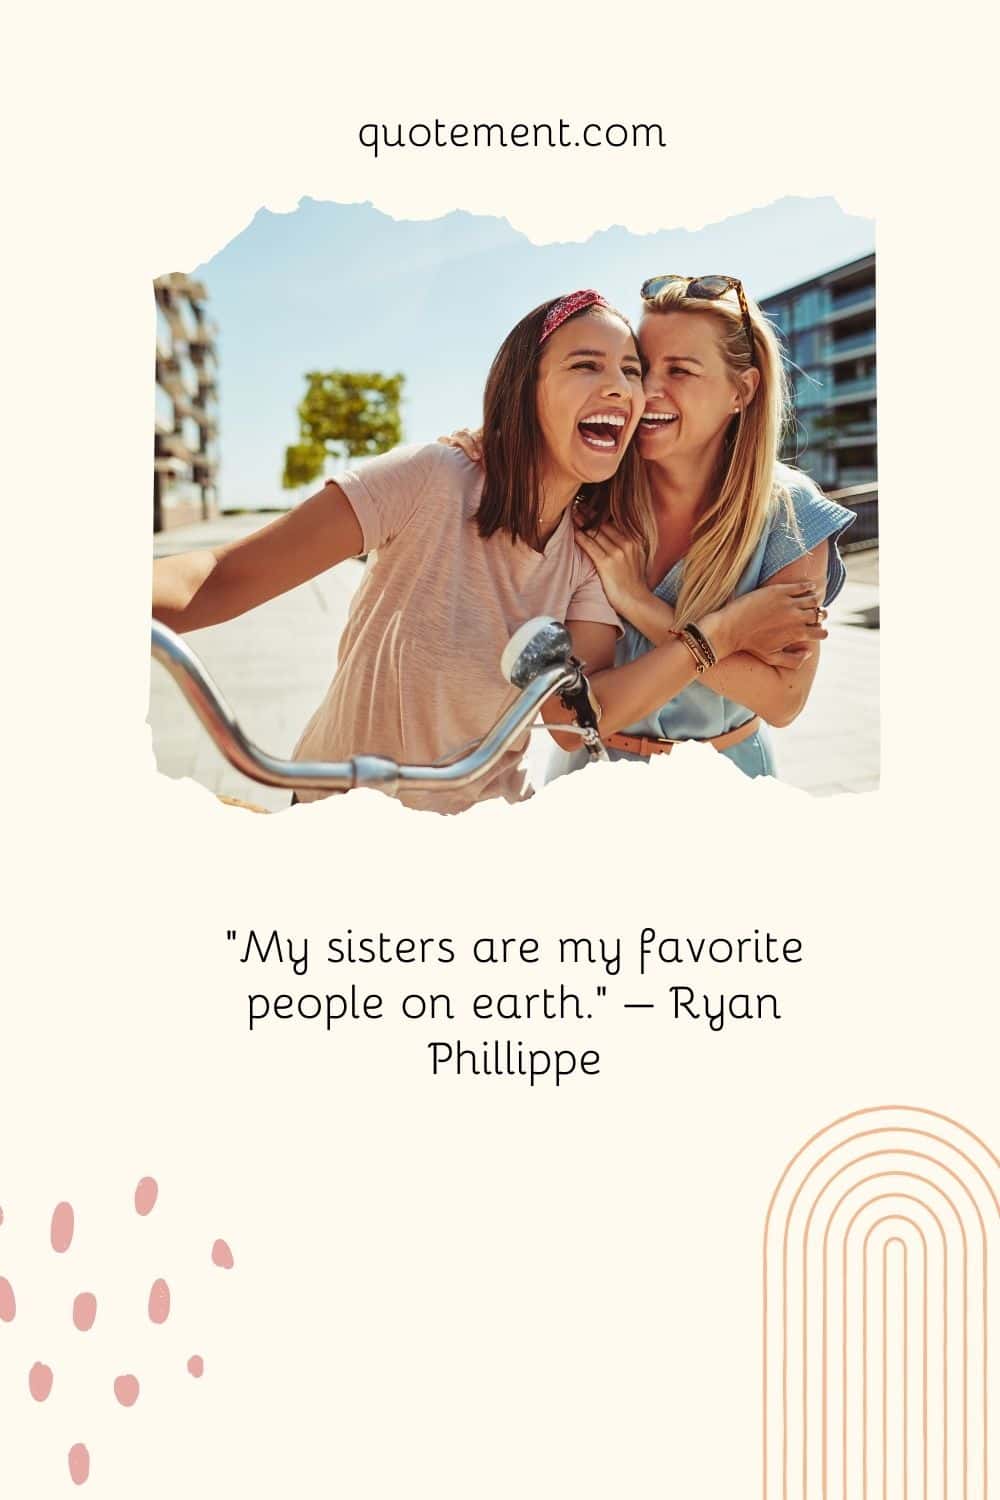 “My sisters are my favorite people on earth.” – Ryan Phillippe